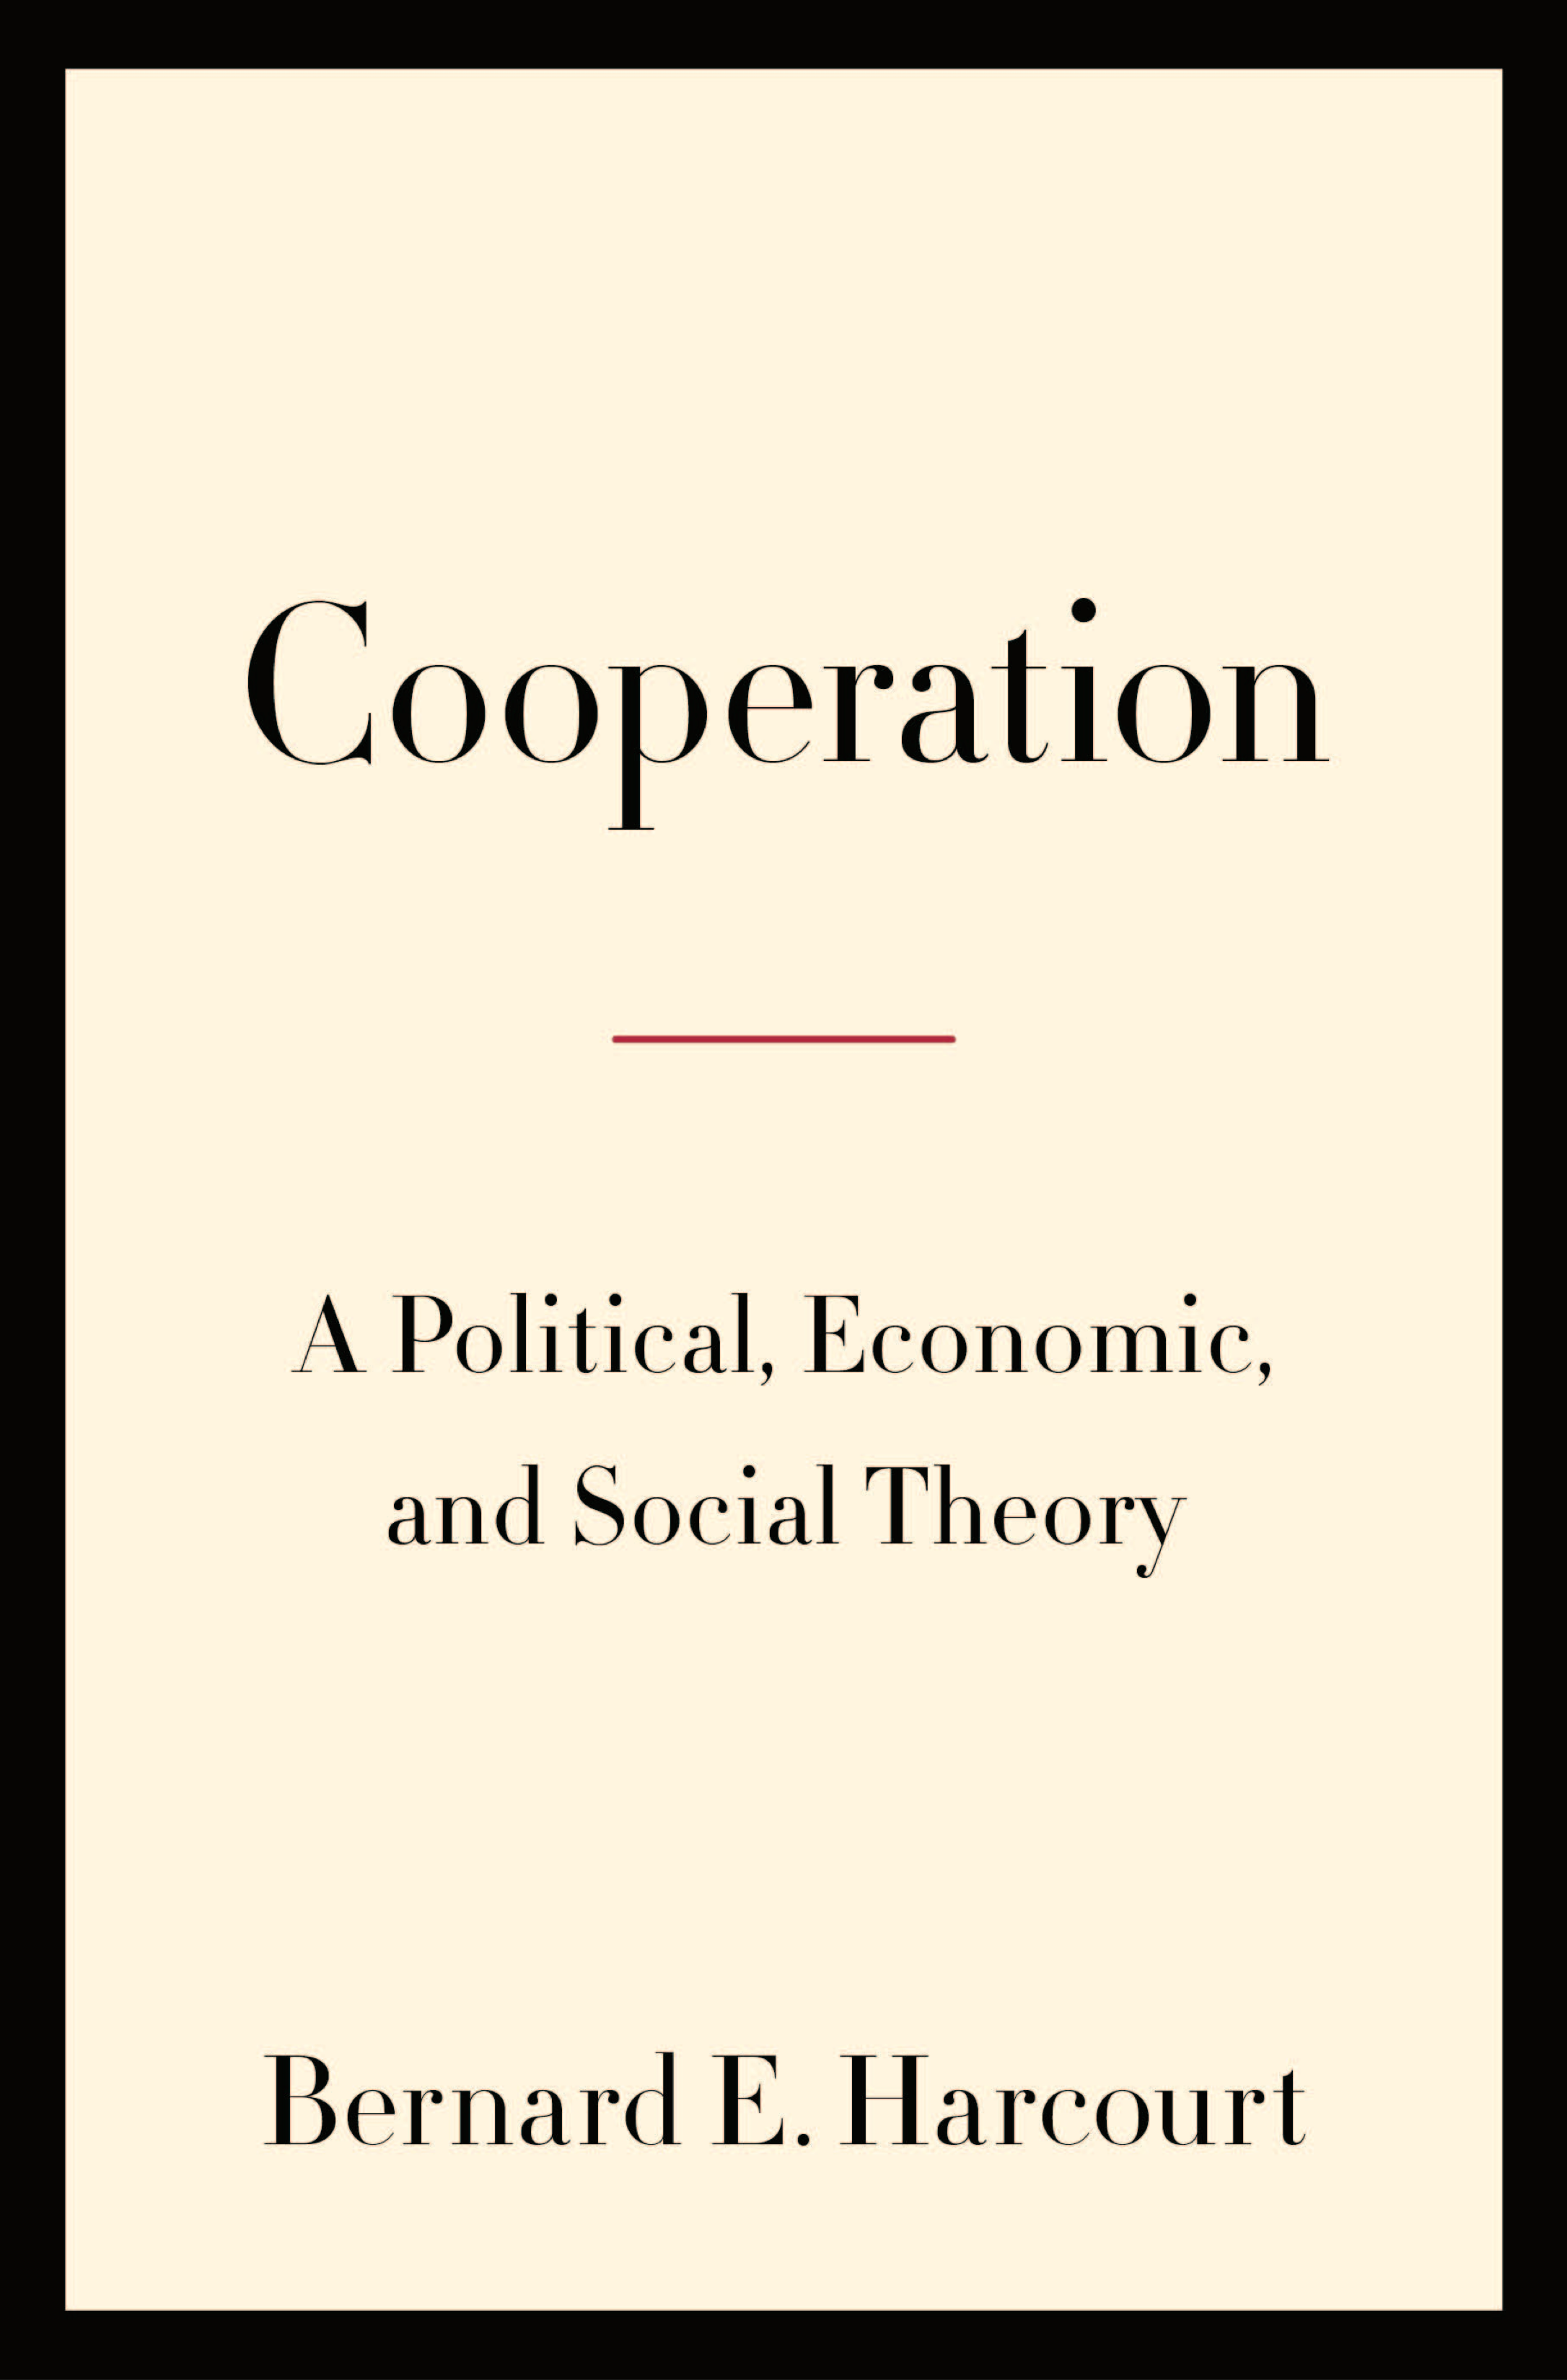 Cooperative Ideals at the Heart of Everything: On Bernard Harcourt’s “Cooperation”